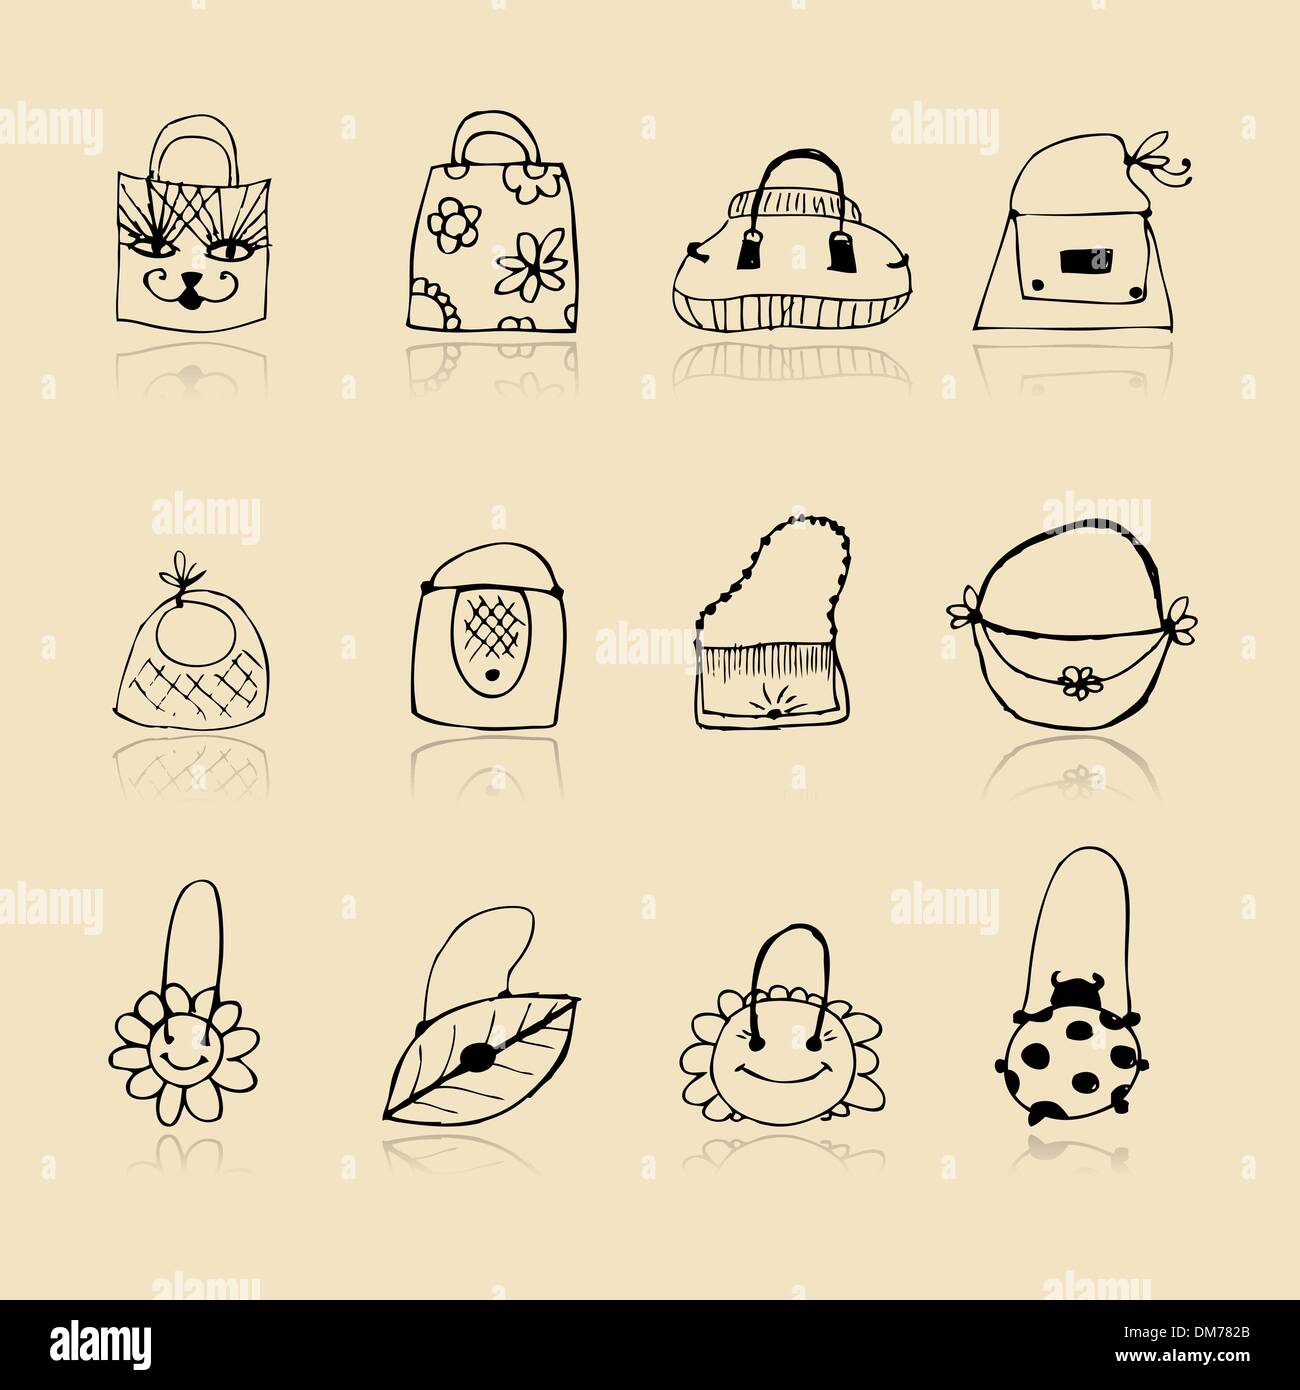 Sketches of bags. vector fashion illustration isolated on white background.  | CanStock